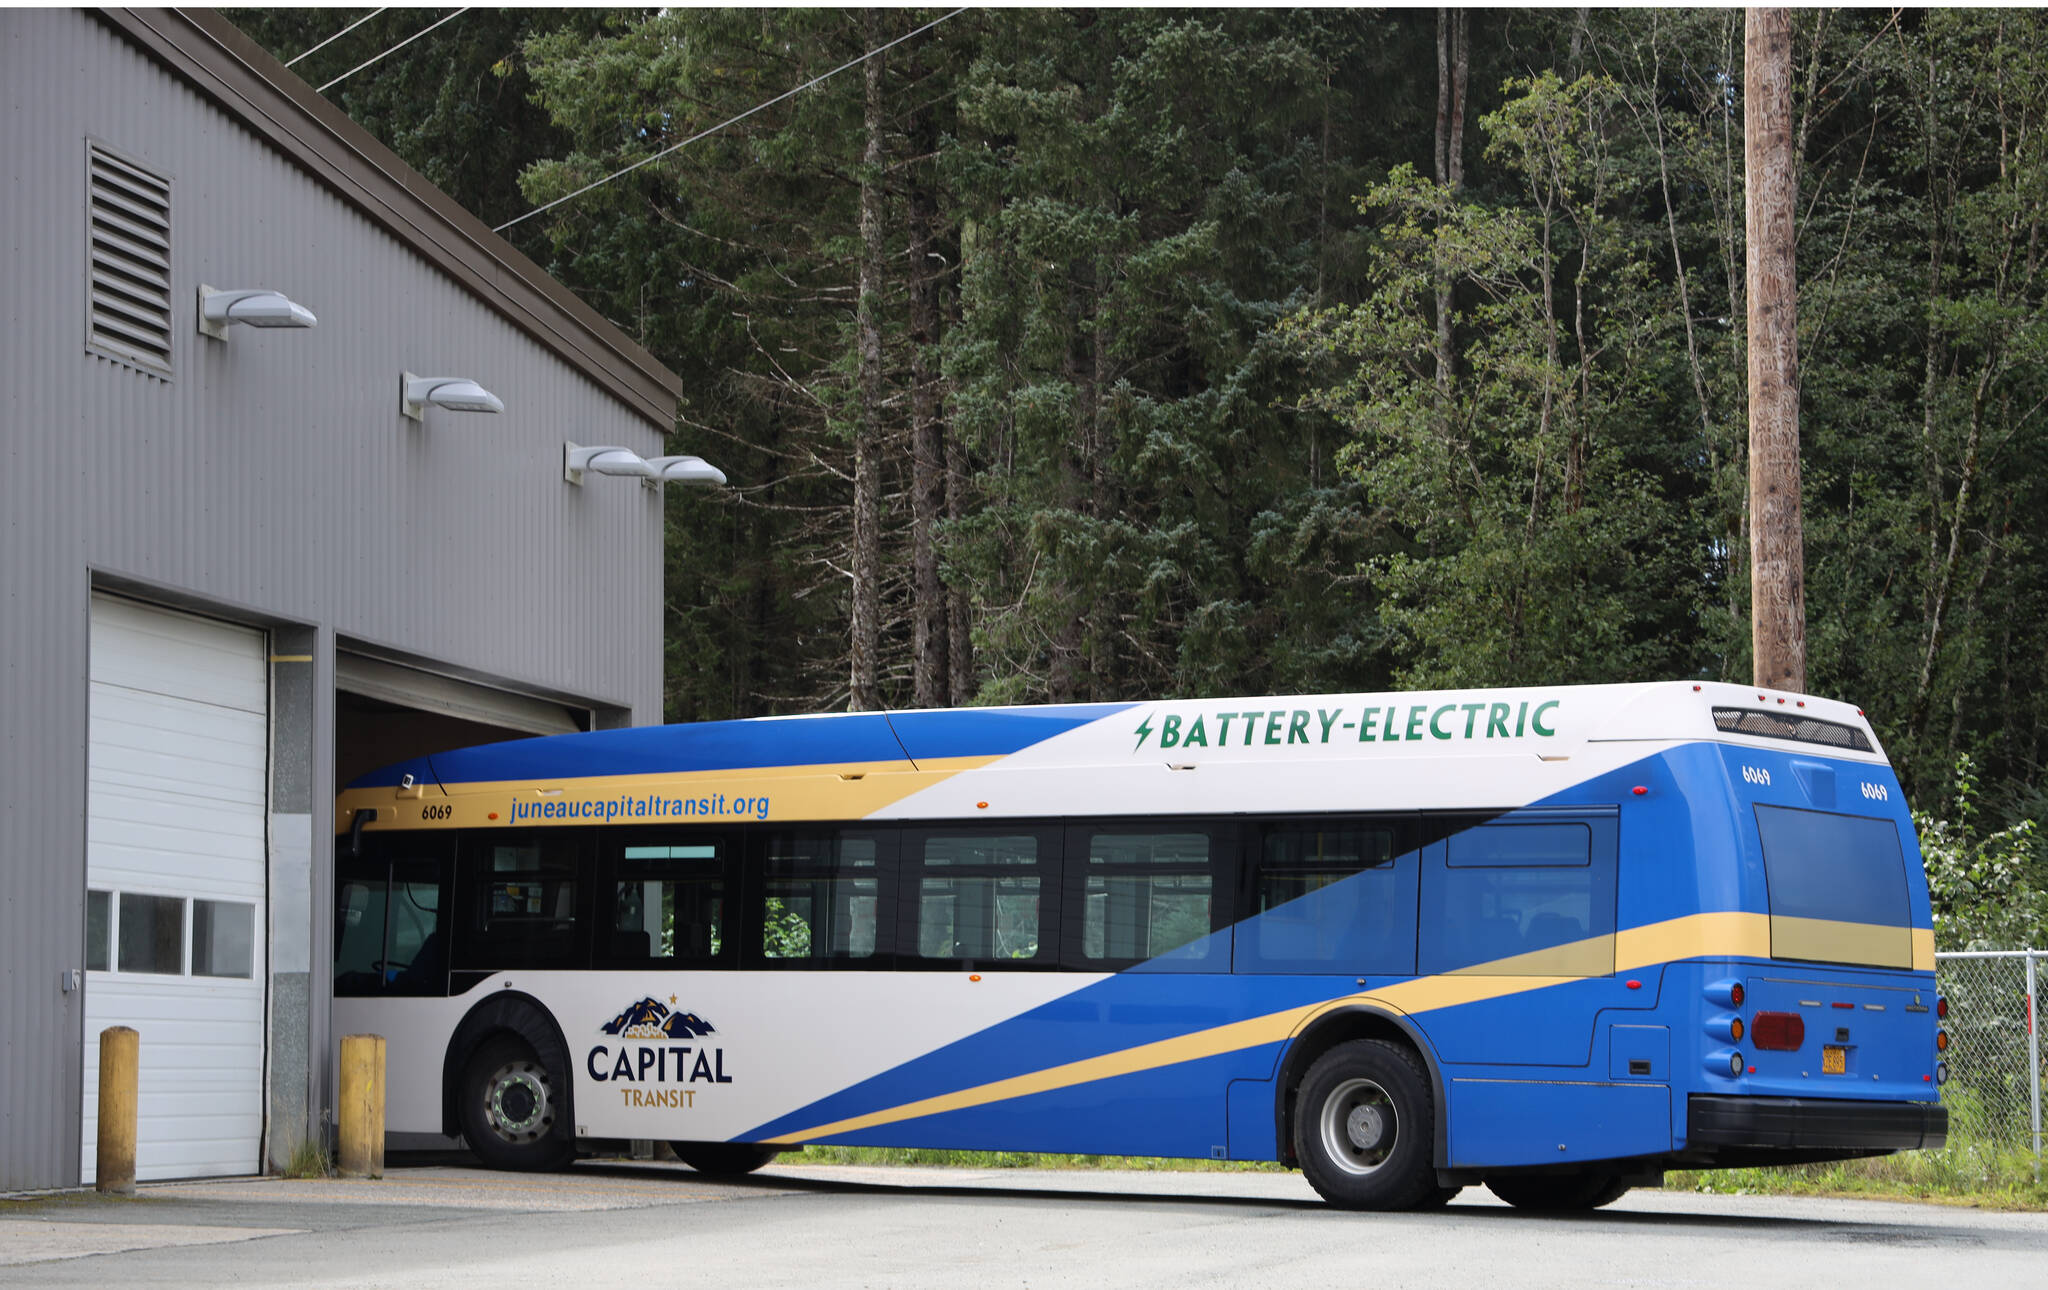 The only electric bus enters the City Borough of Juneau Capital Transit’s bus barn on Tuesday afternoon. Capital Transit is preparing for the addition of seven electric buses which are slated to hit Juneau’s roads sometime in 2024. (Clarise Larson / Juneau Empire)